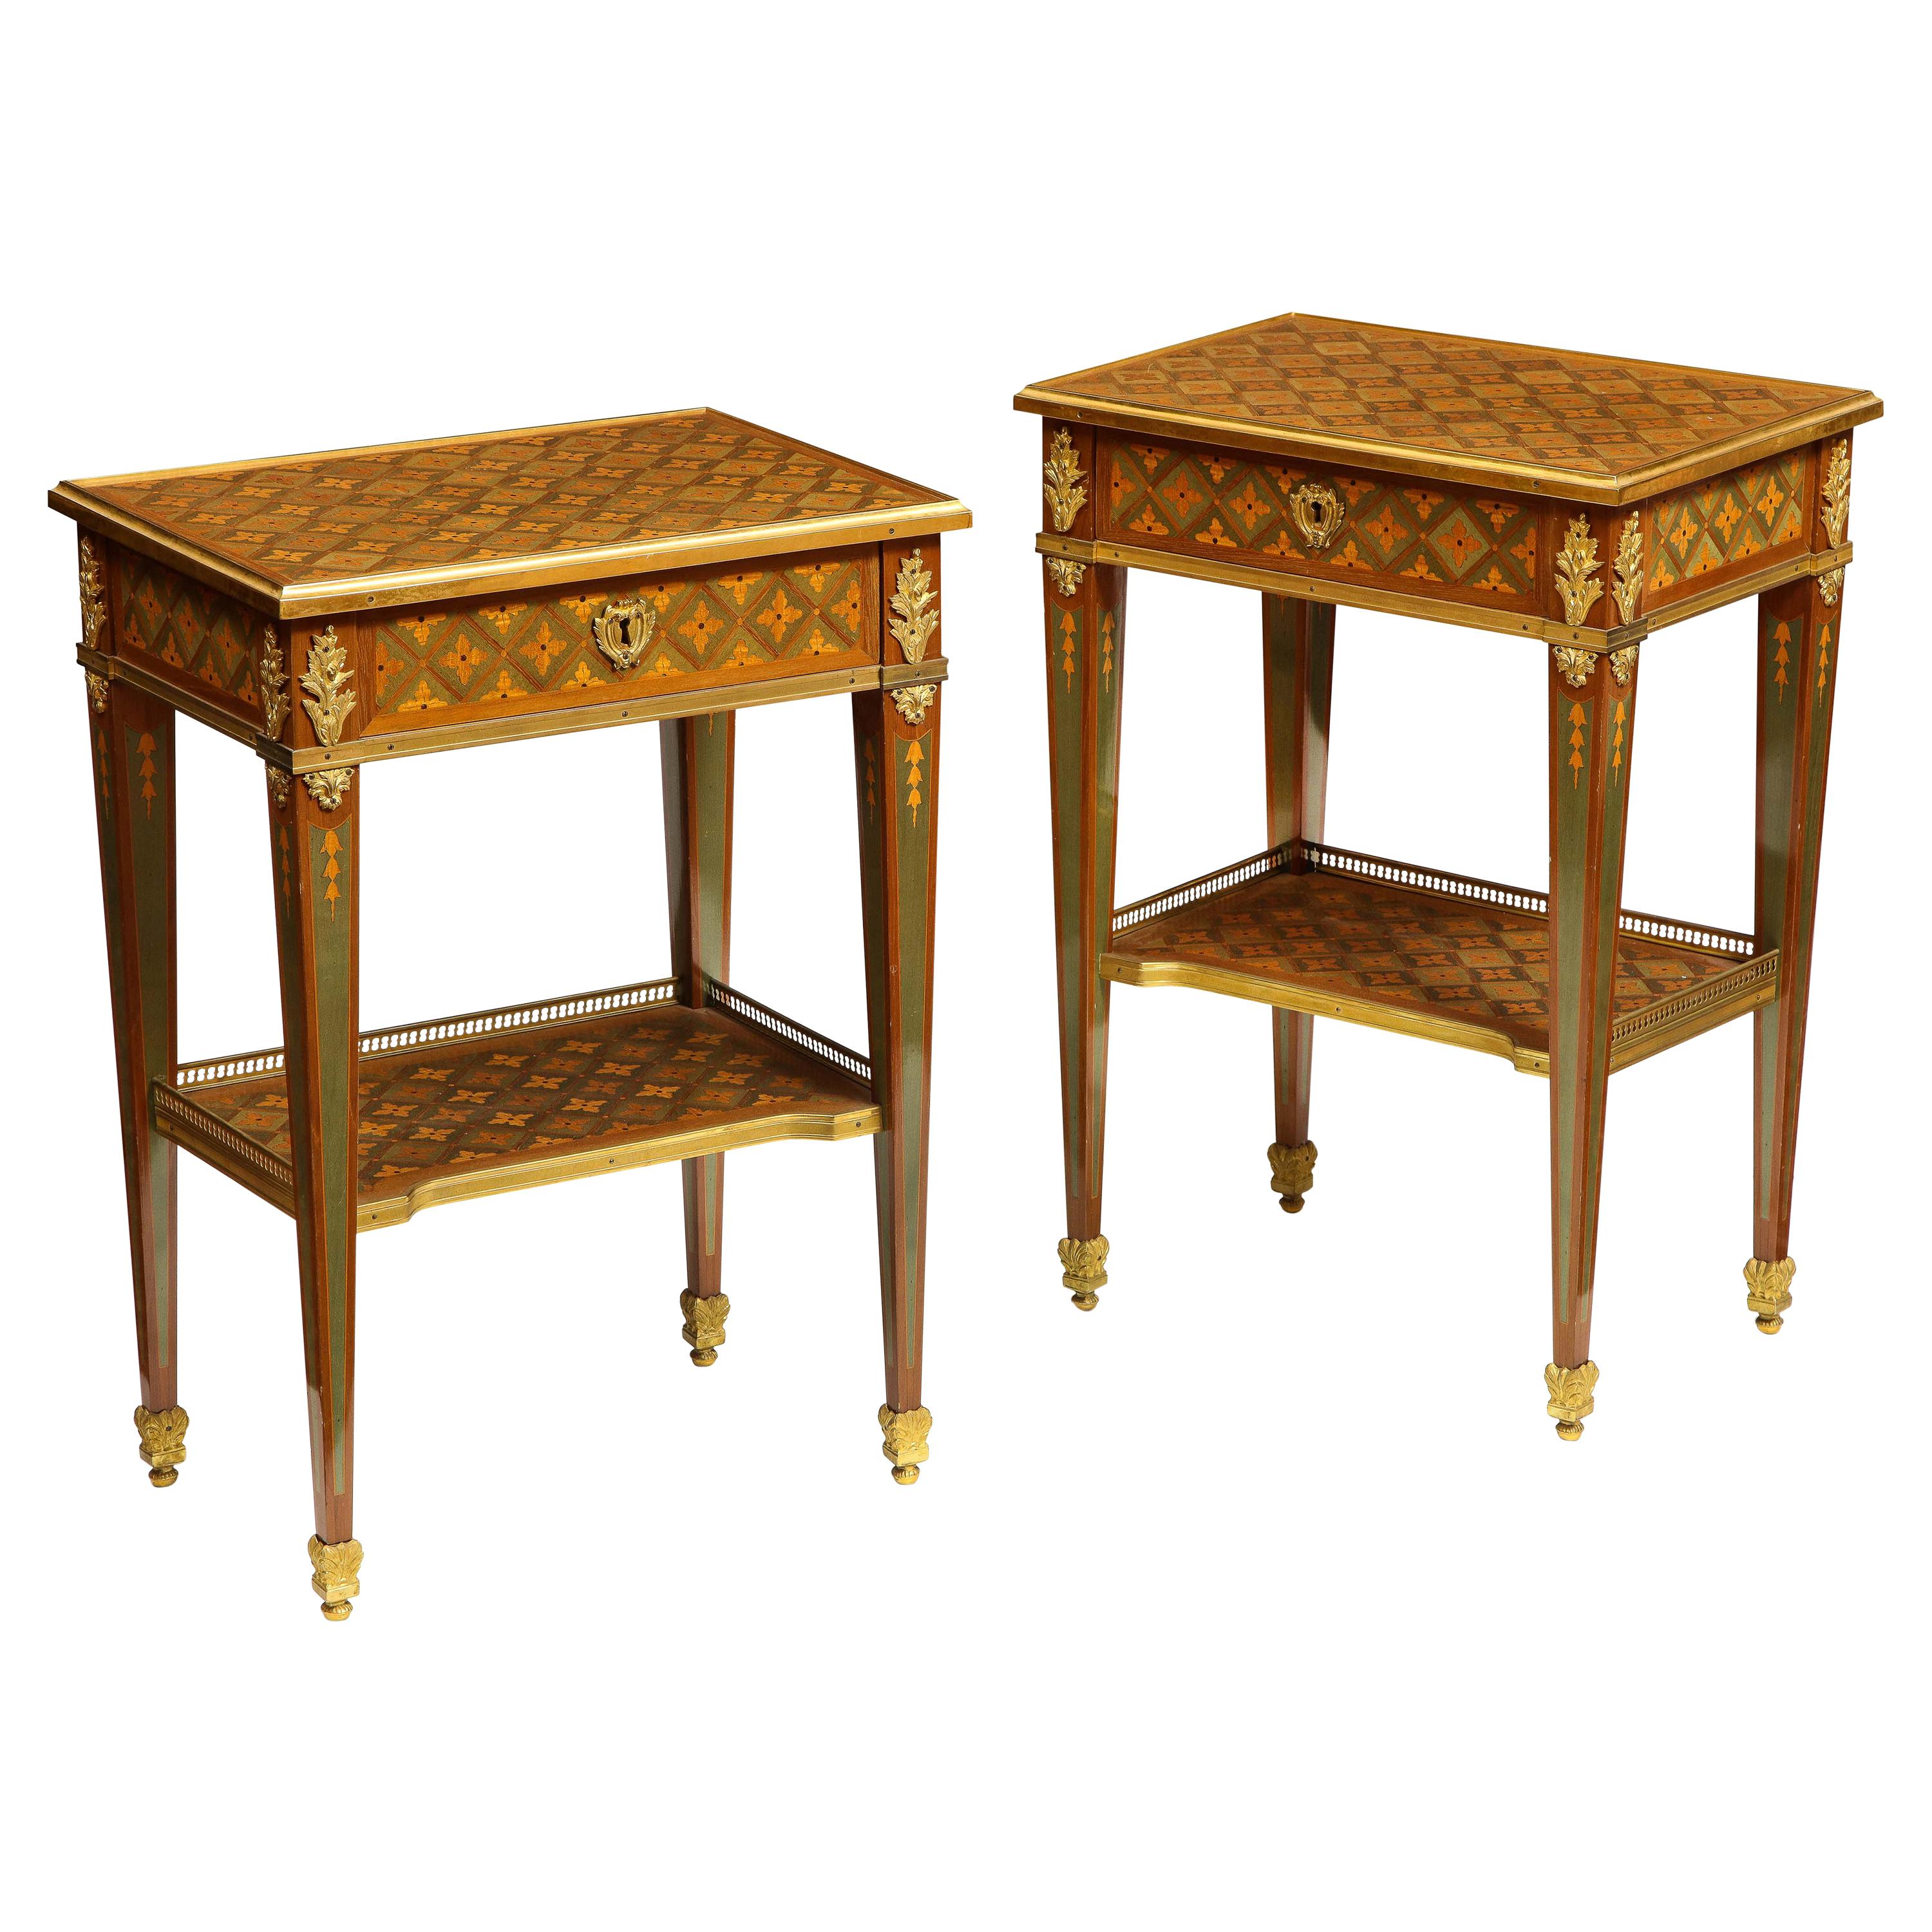 Exceptional Pair of French Ormolu-Mounted Parquetry and Marquetry Side Tables